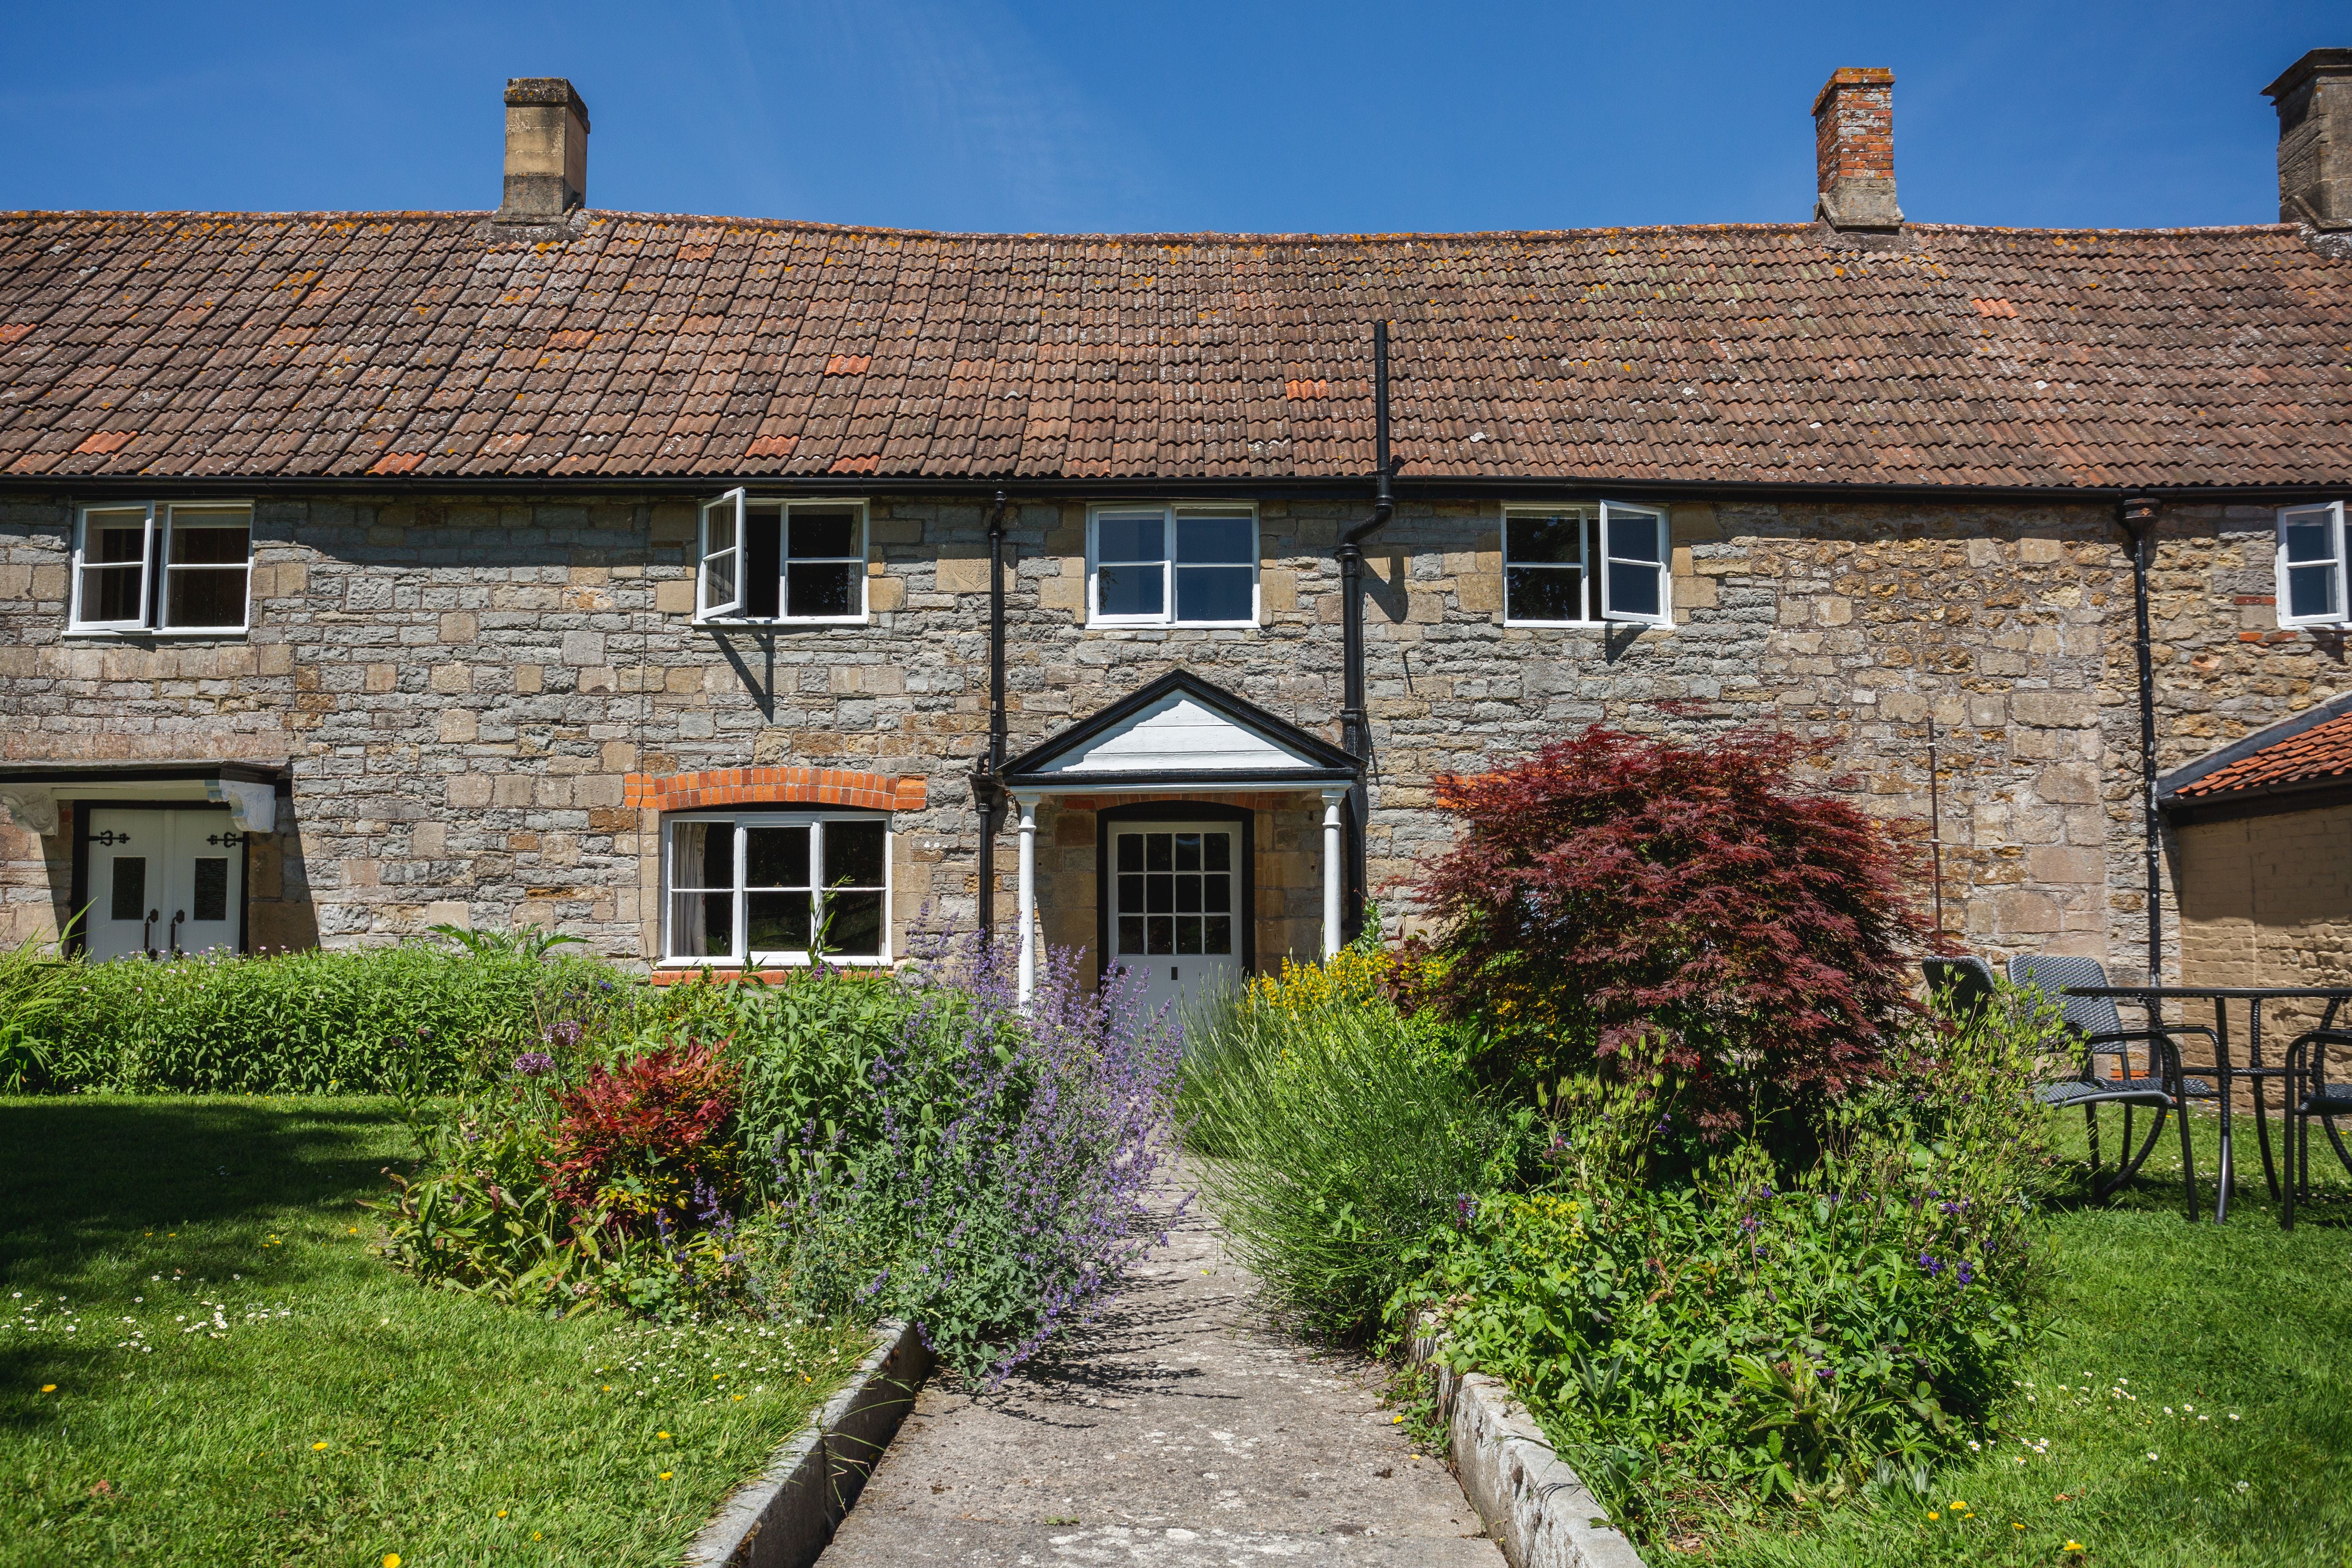 The self-catering cottages are a stone's throw from Glastonbury town centre